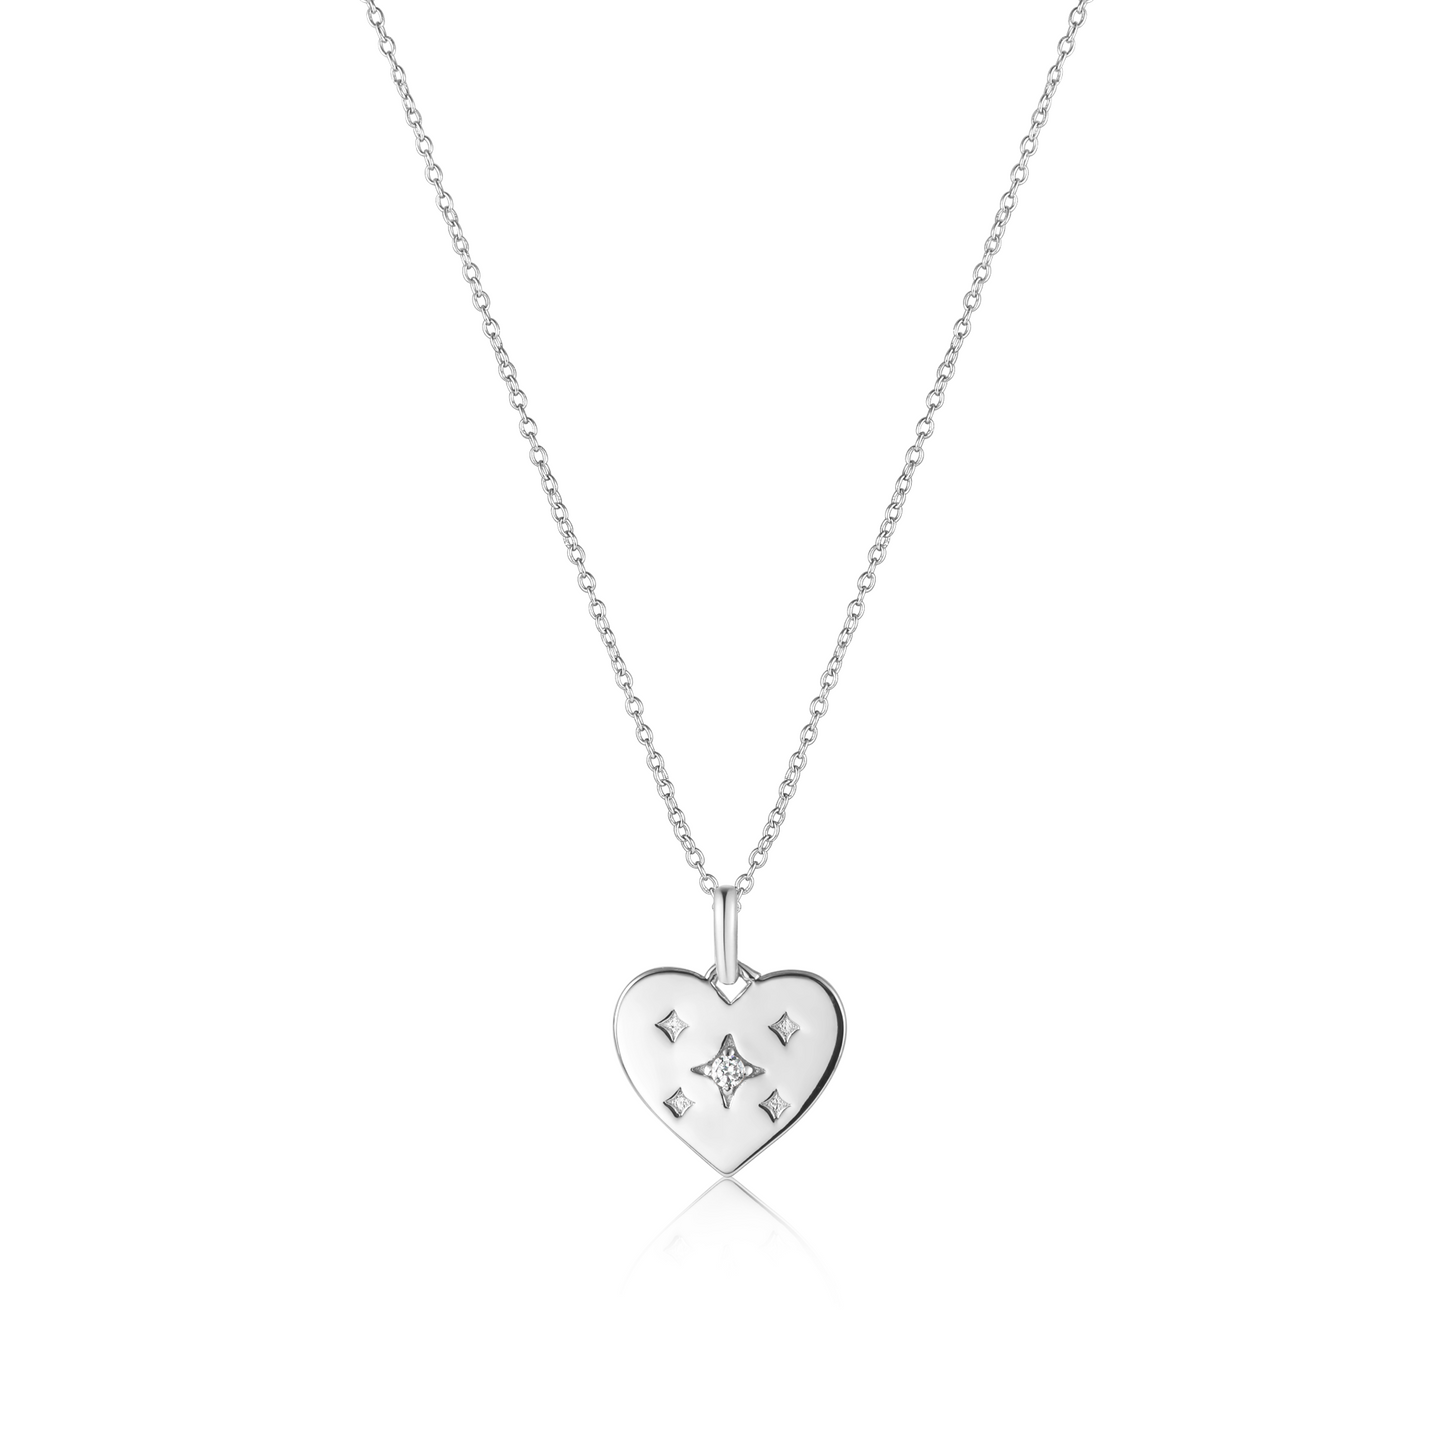 Silver Starry Heart Necklace